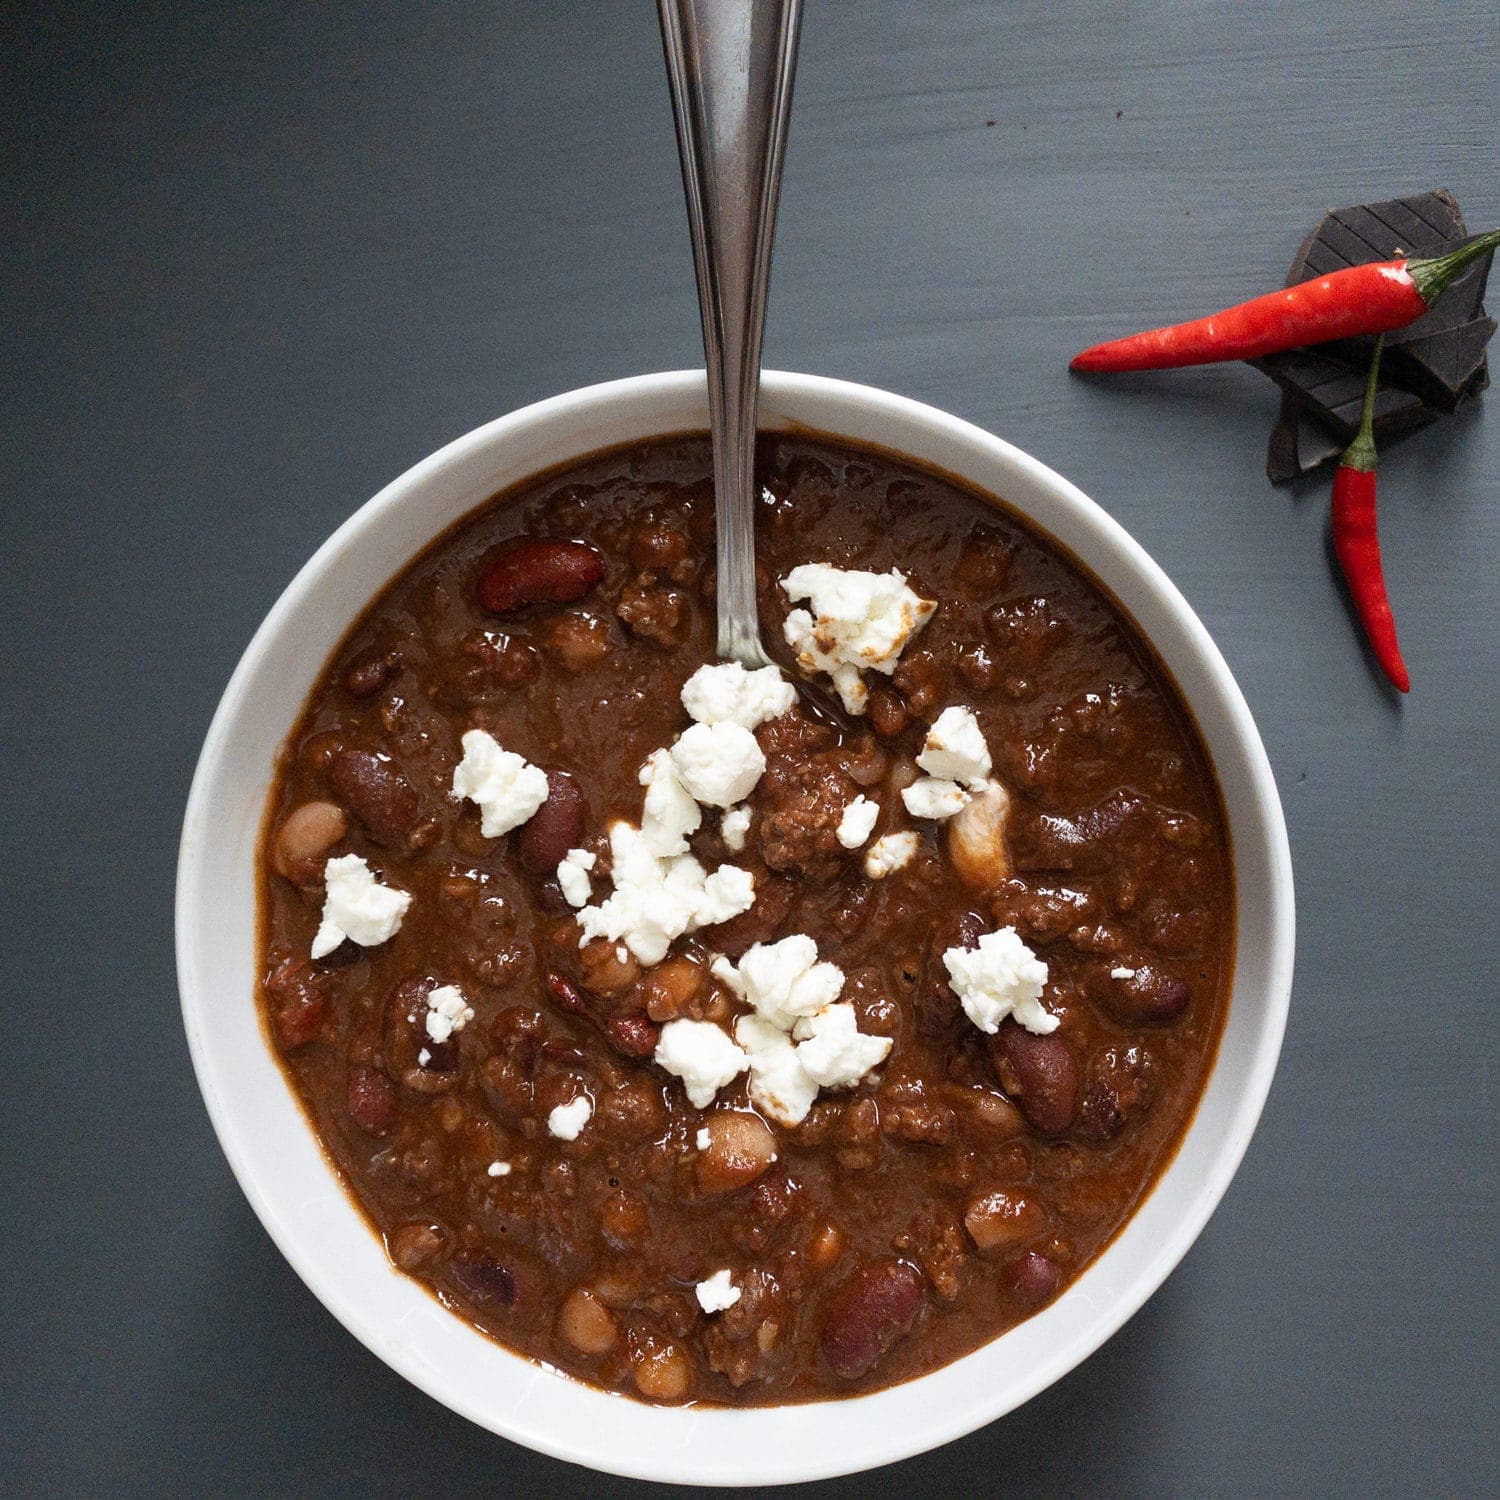 Smoky Chili con Carne in a bowl with a chili and chocolate decoration and feta topping